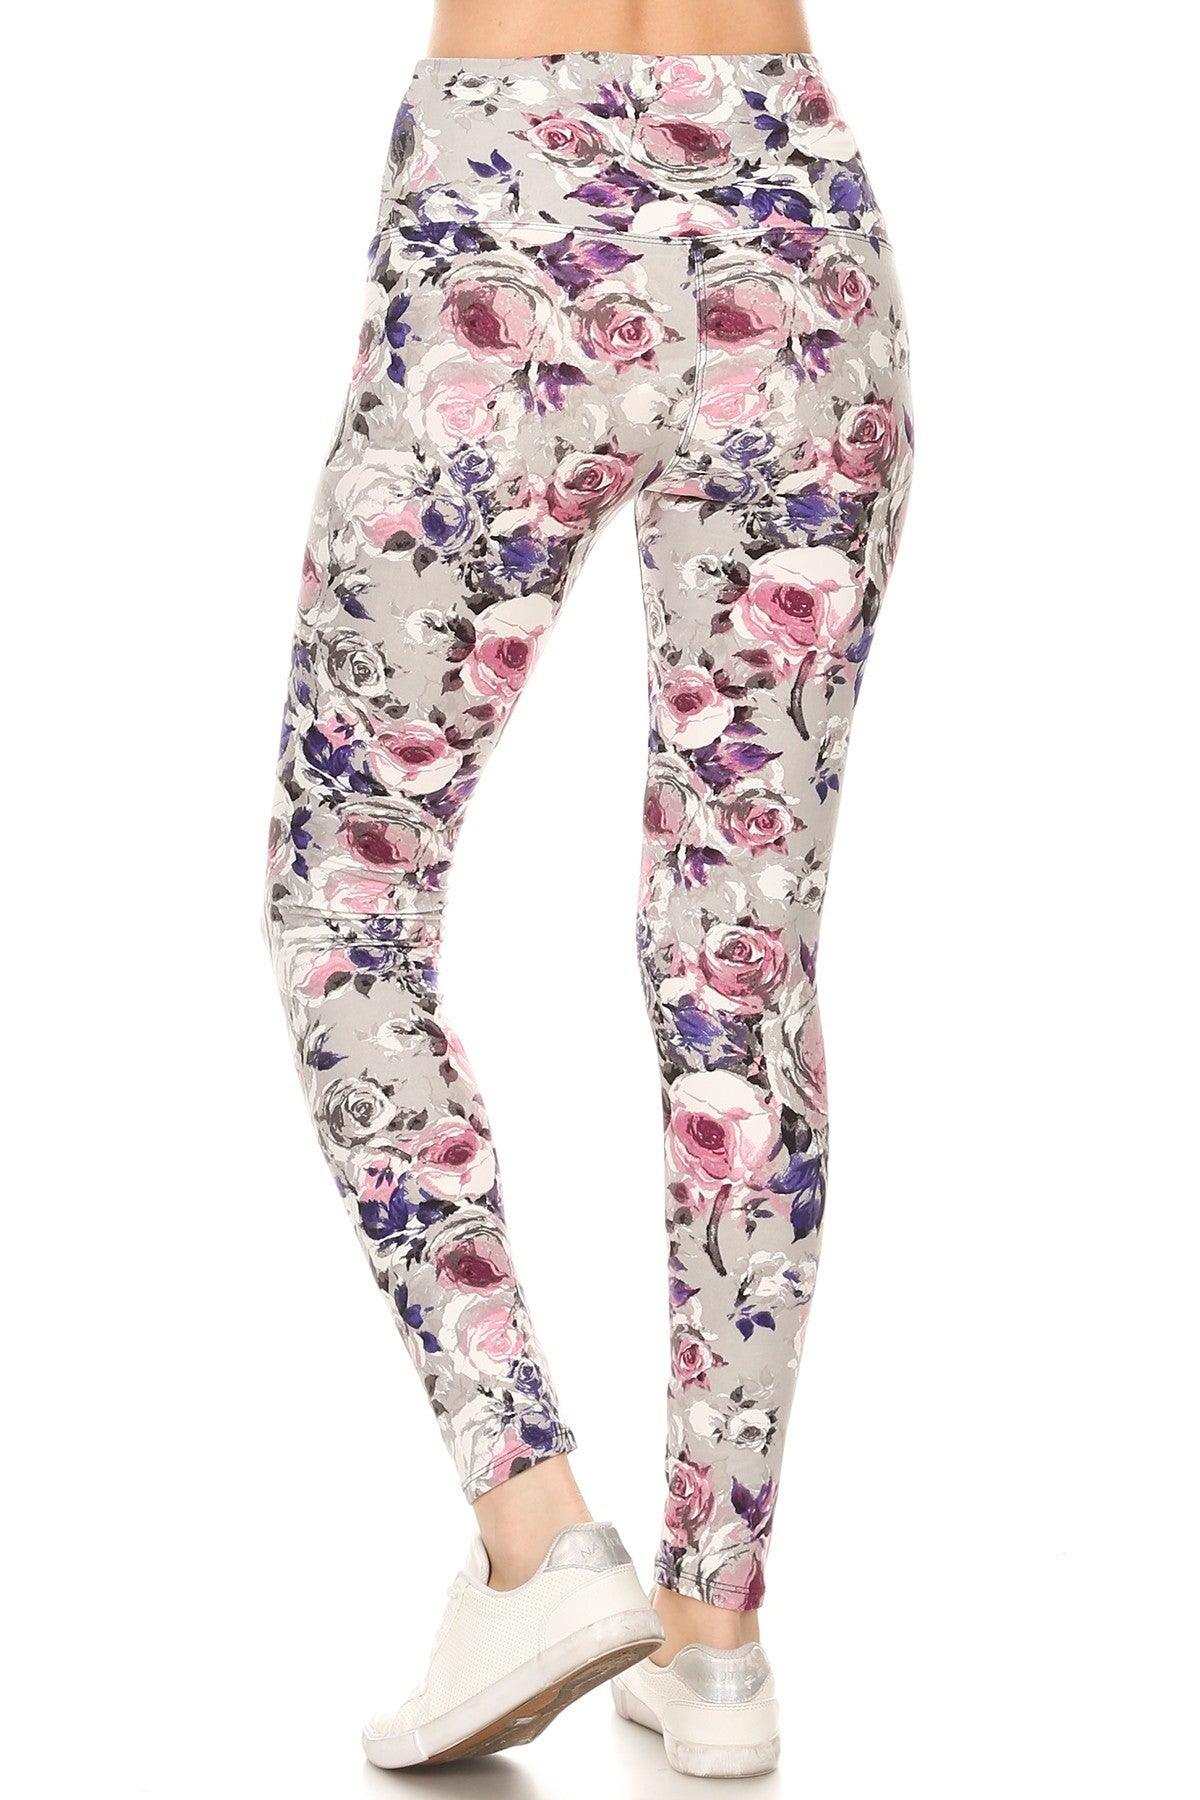 5-inch Long Yoga Style Banded Lined Floral Printed Knit Legging With High Waist Naughty Smile Fashion